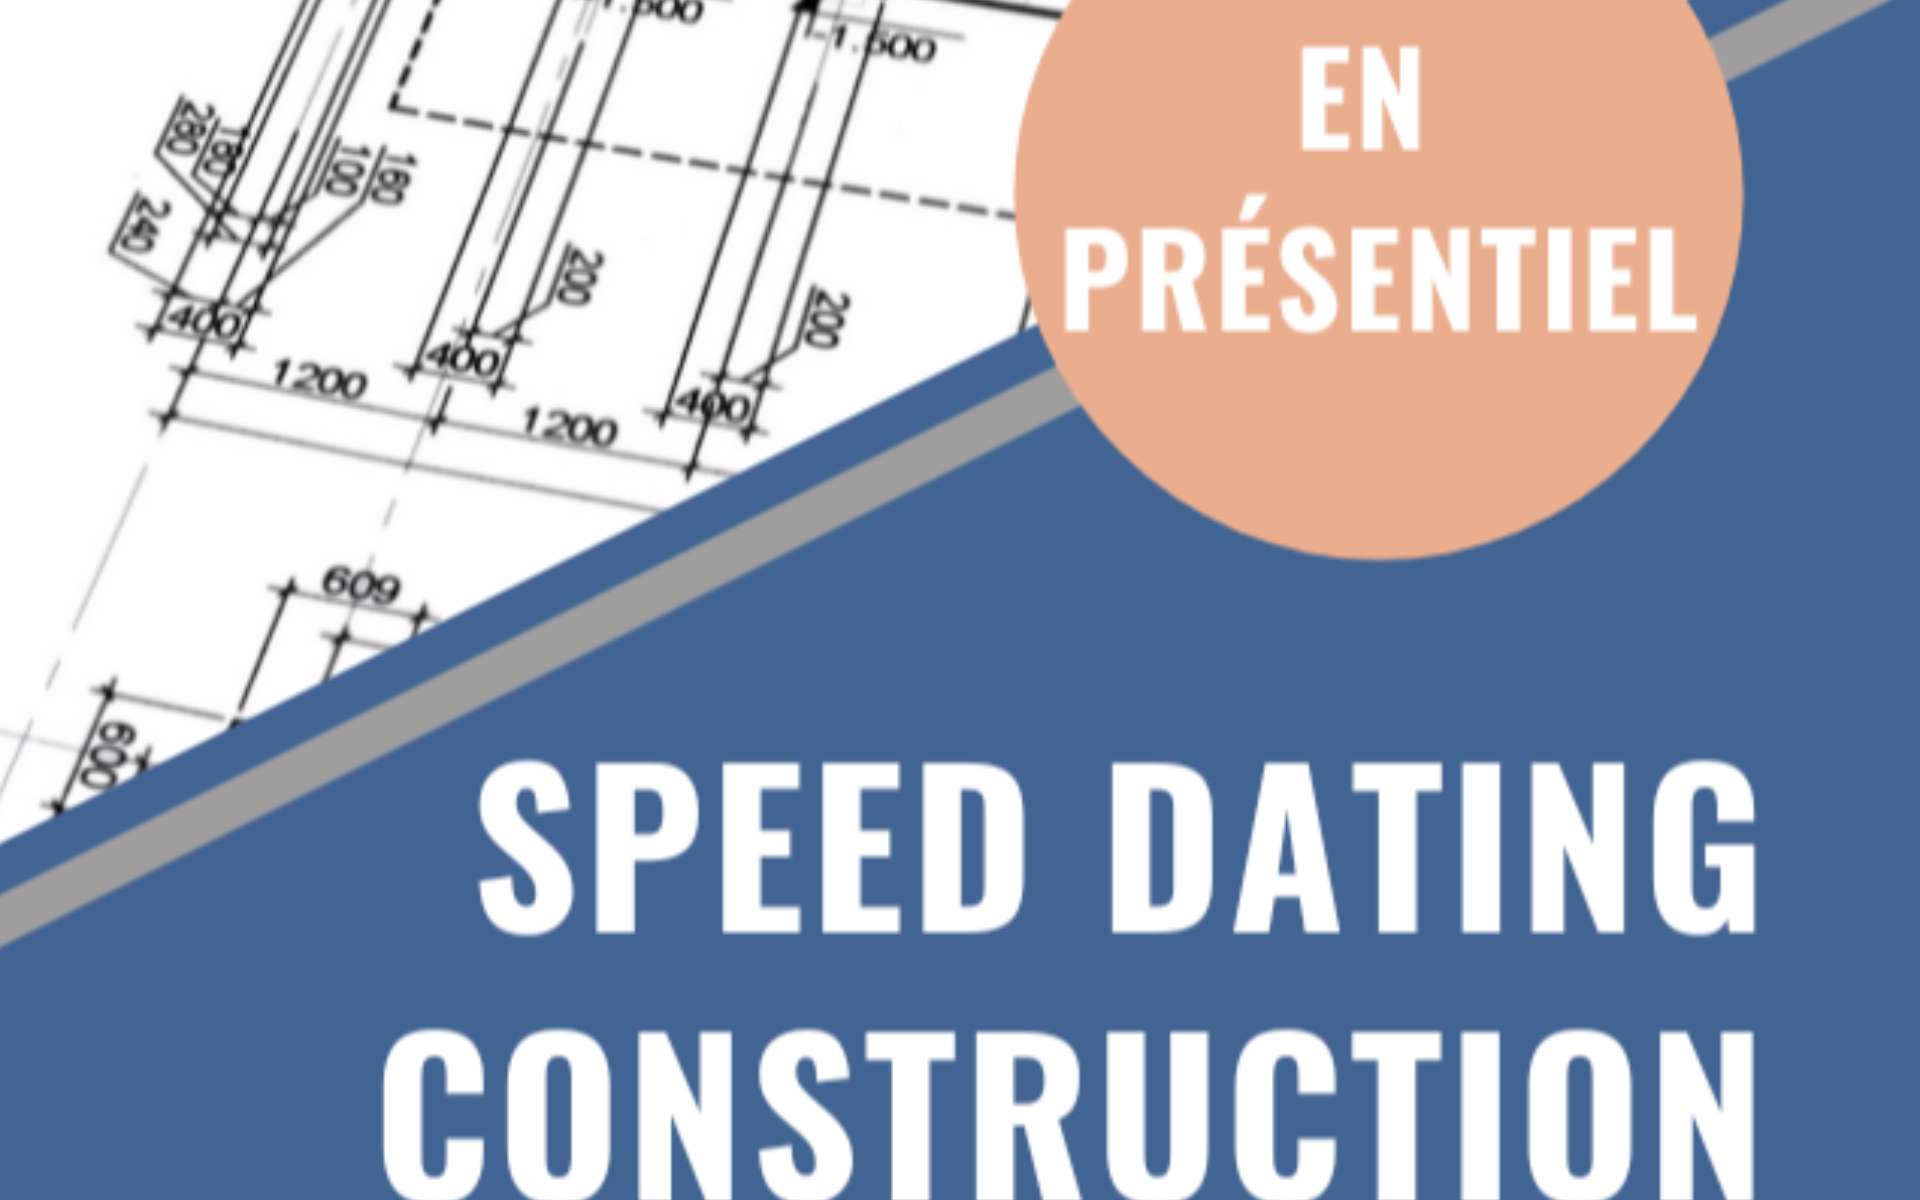 Speed dating construction, Edition 2023